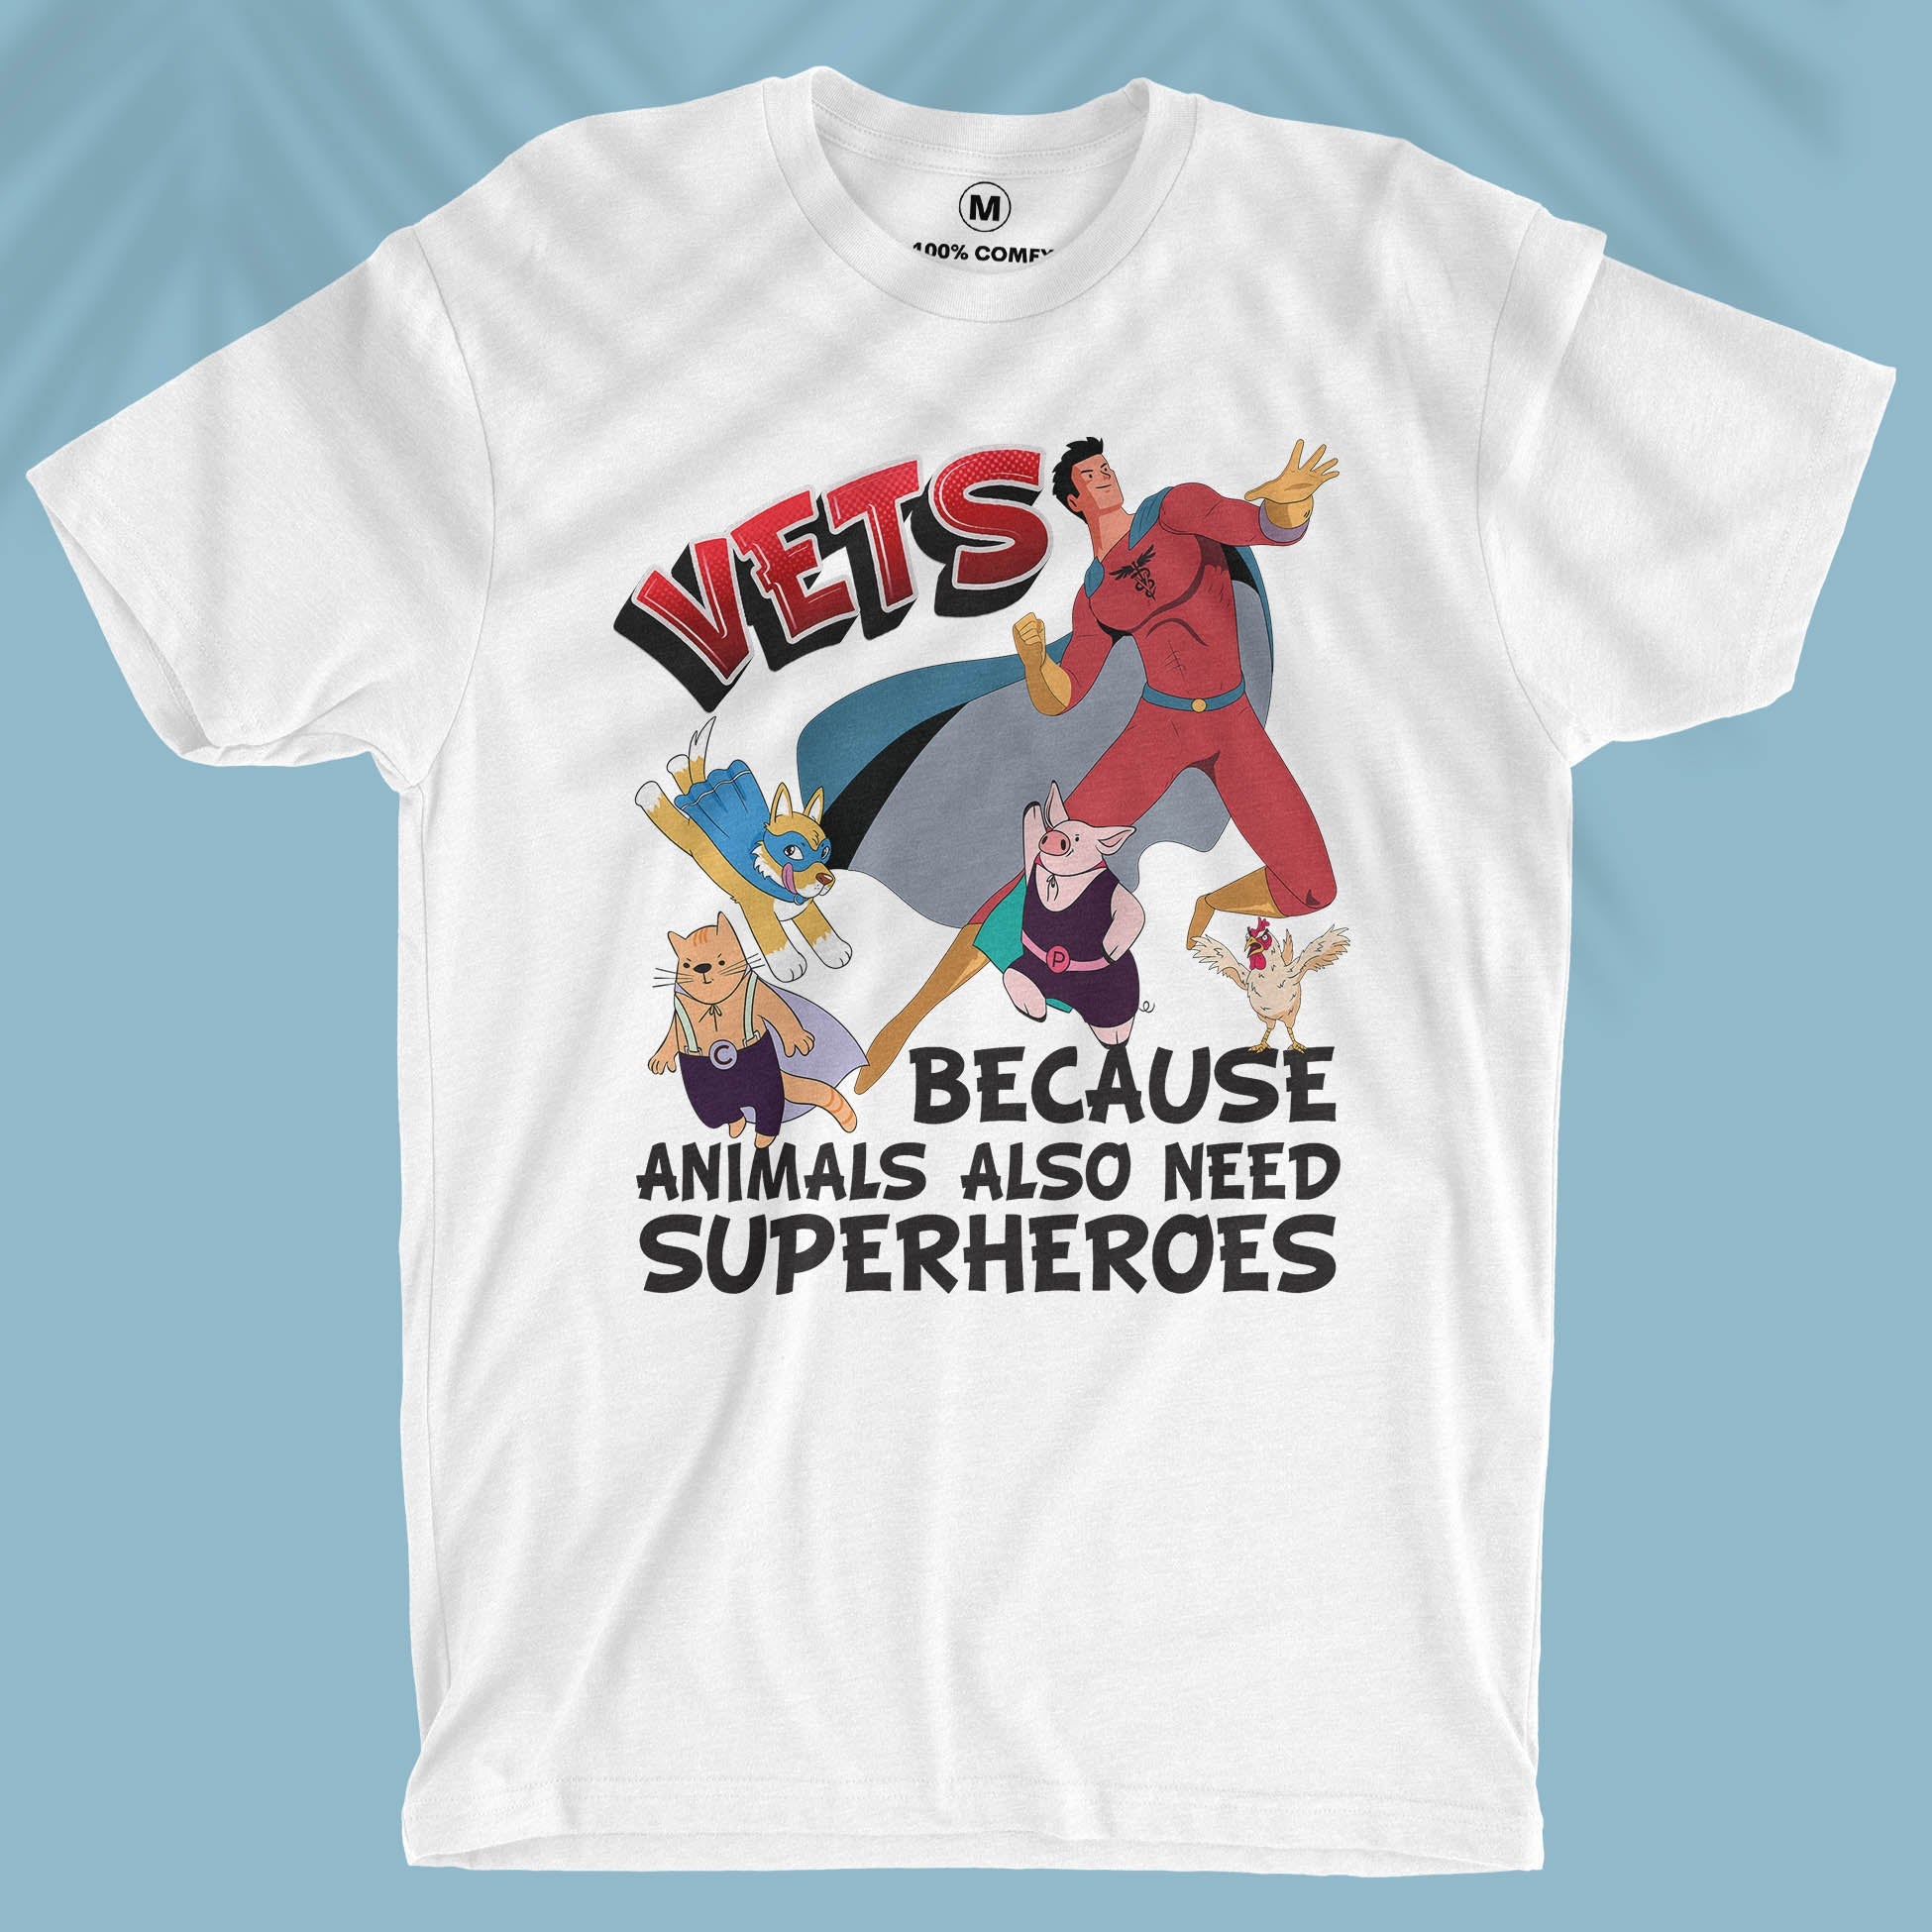 Vets Because Animals Also Need Superheroes - Unisex T-shirt